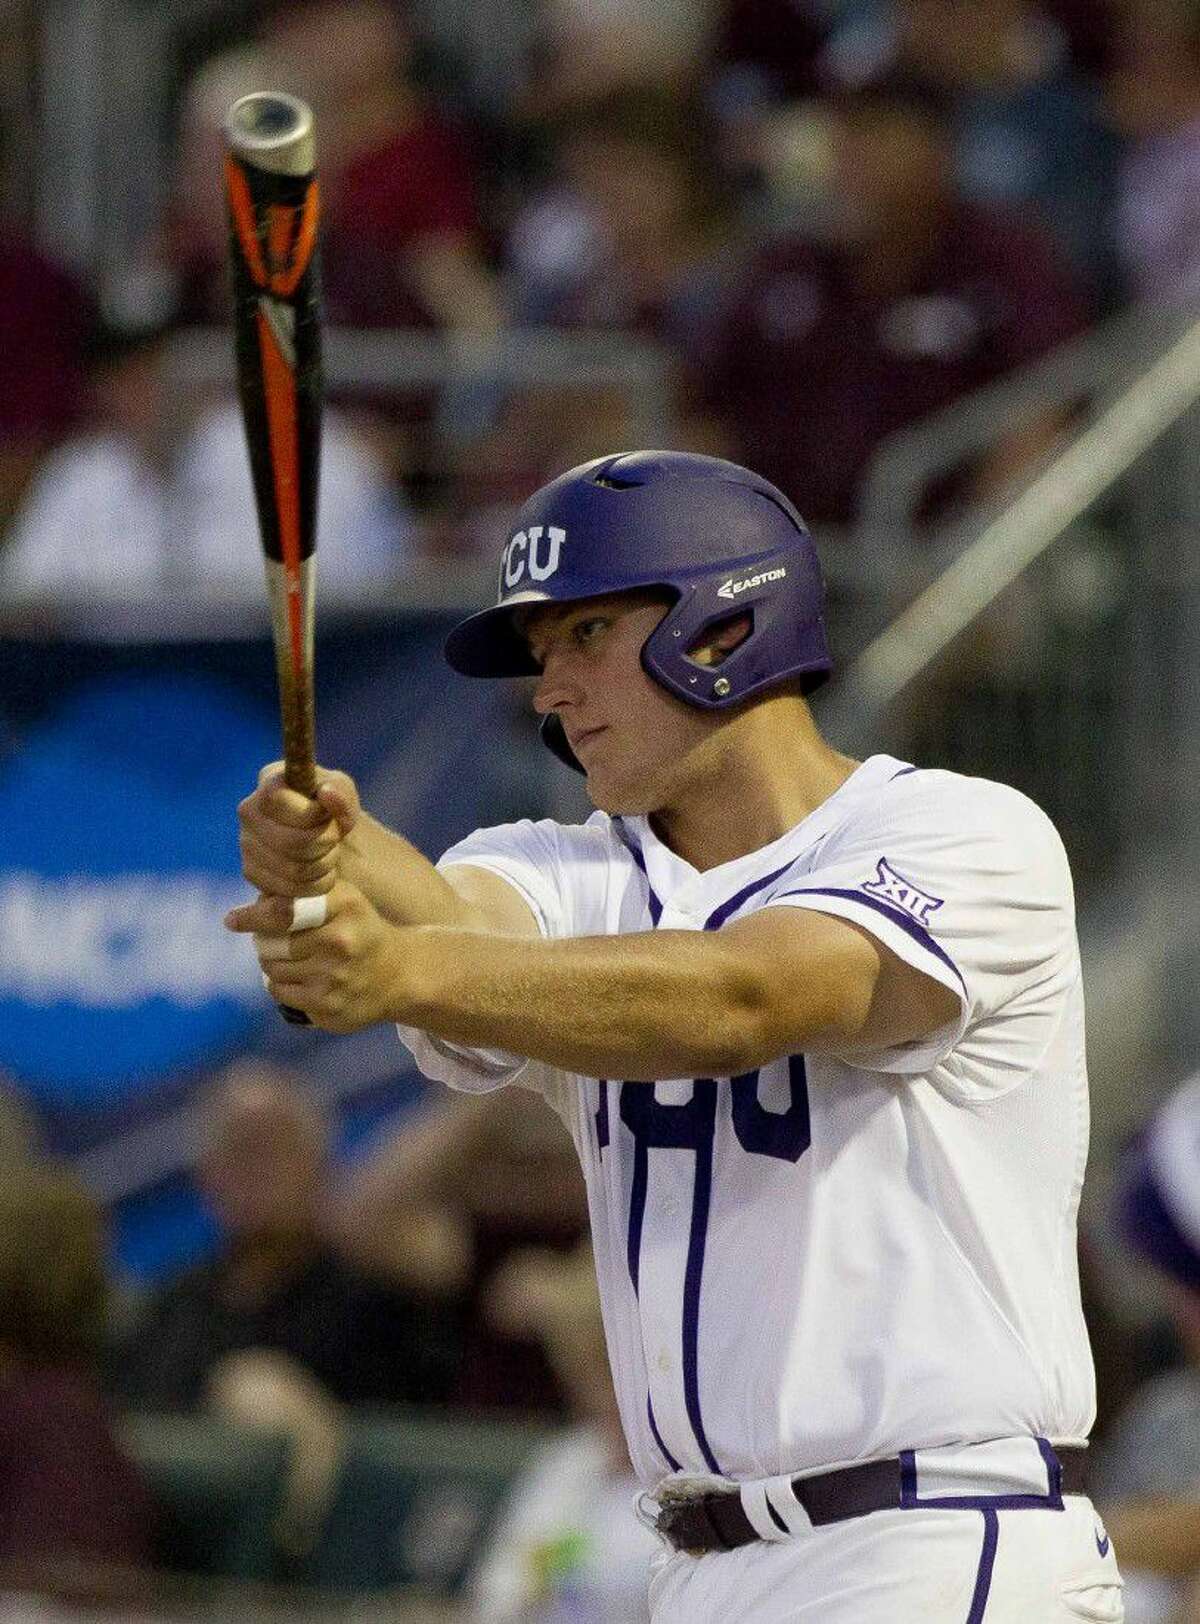 Oak Ridge grad and TCU designated hitter Luken Baker warms up during the second inning of an NCAA Super Regional game against Texas A&M on Saturday night.